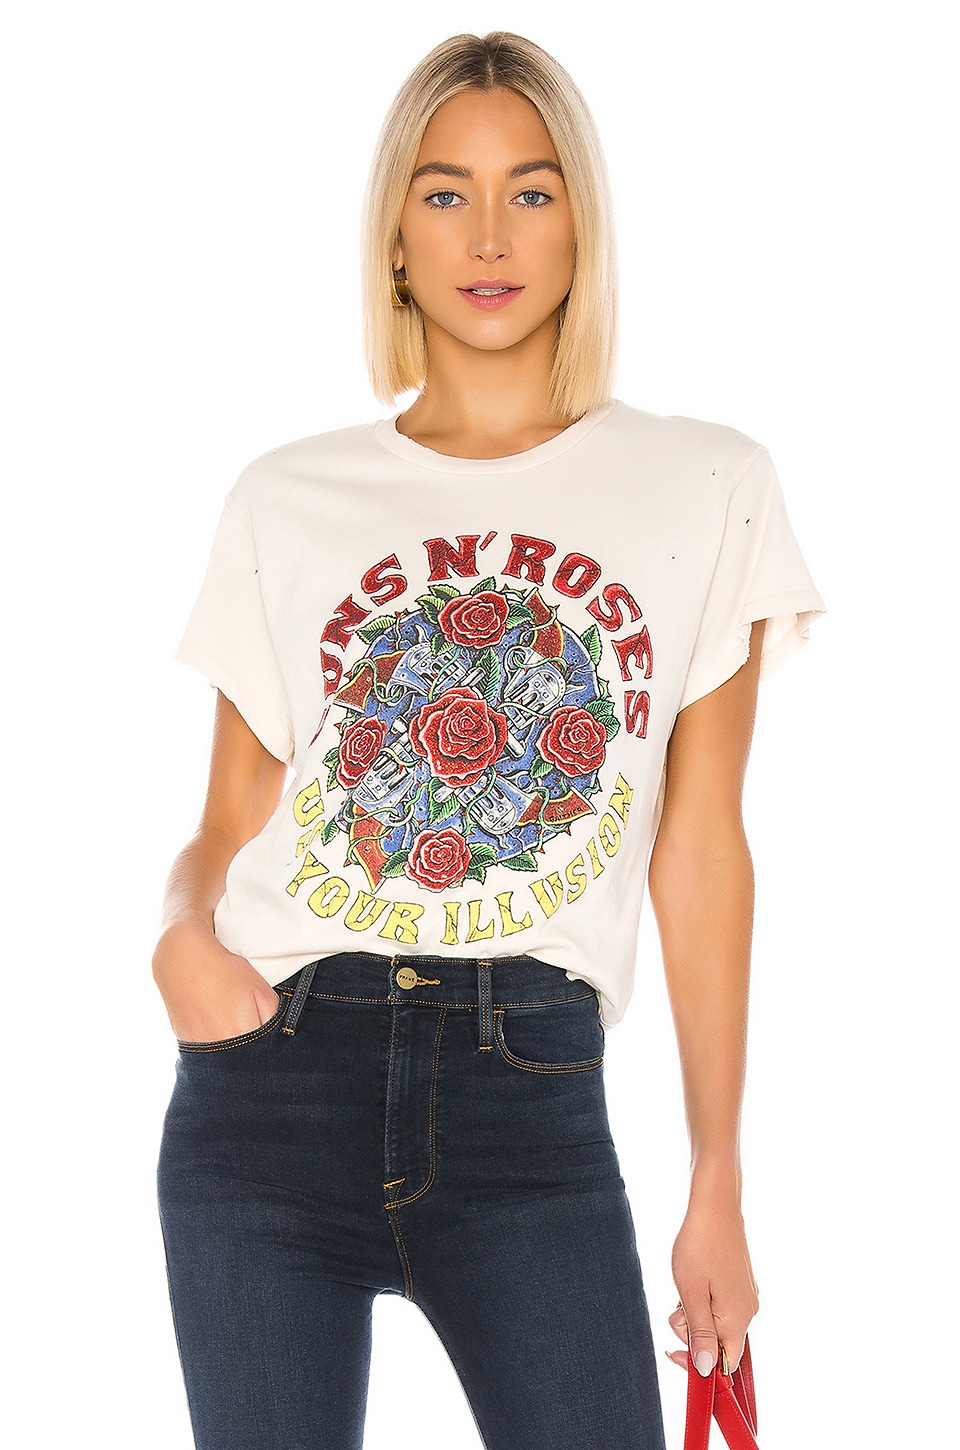 Madeworn Guns N Roses Use Your Illusion Tee in Dirty White | REVOLVE